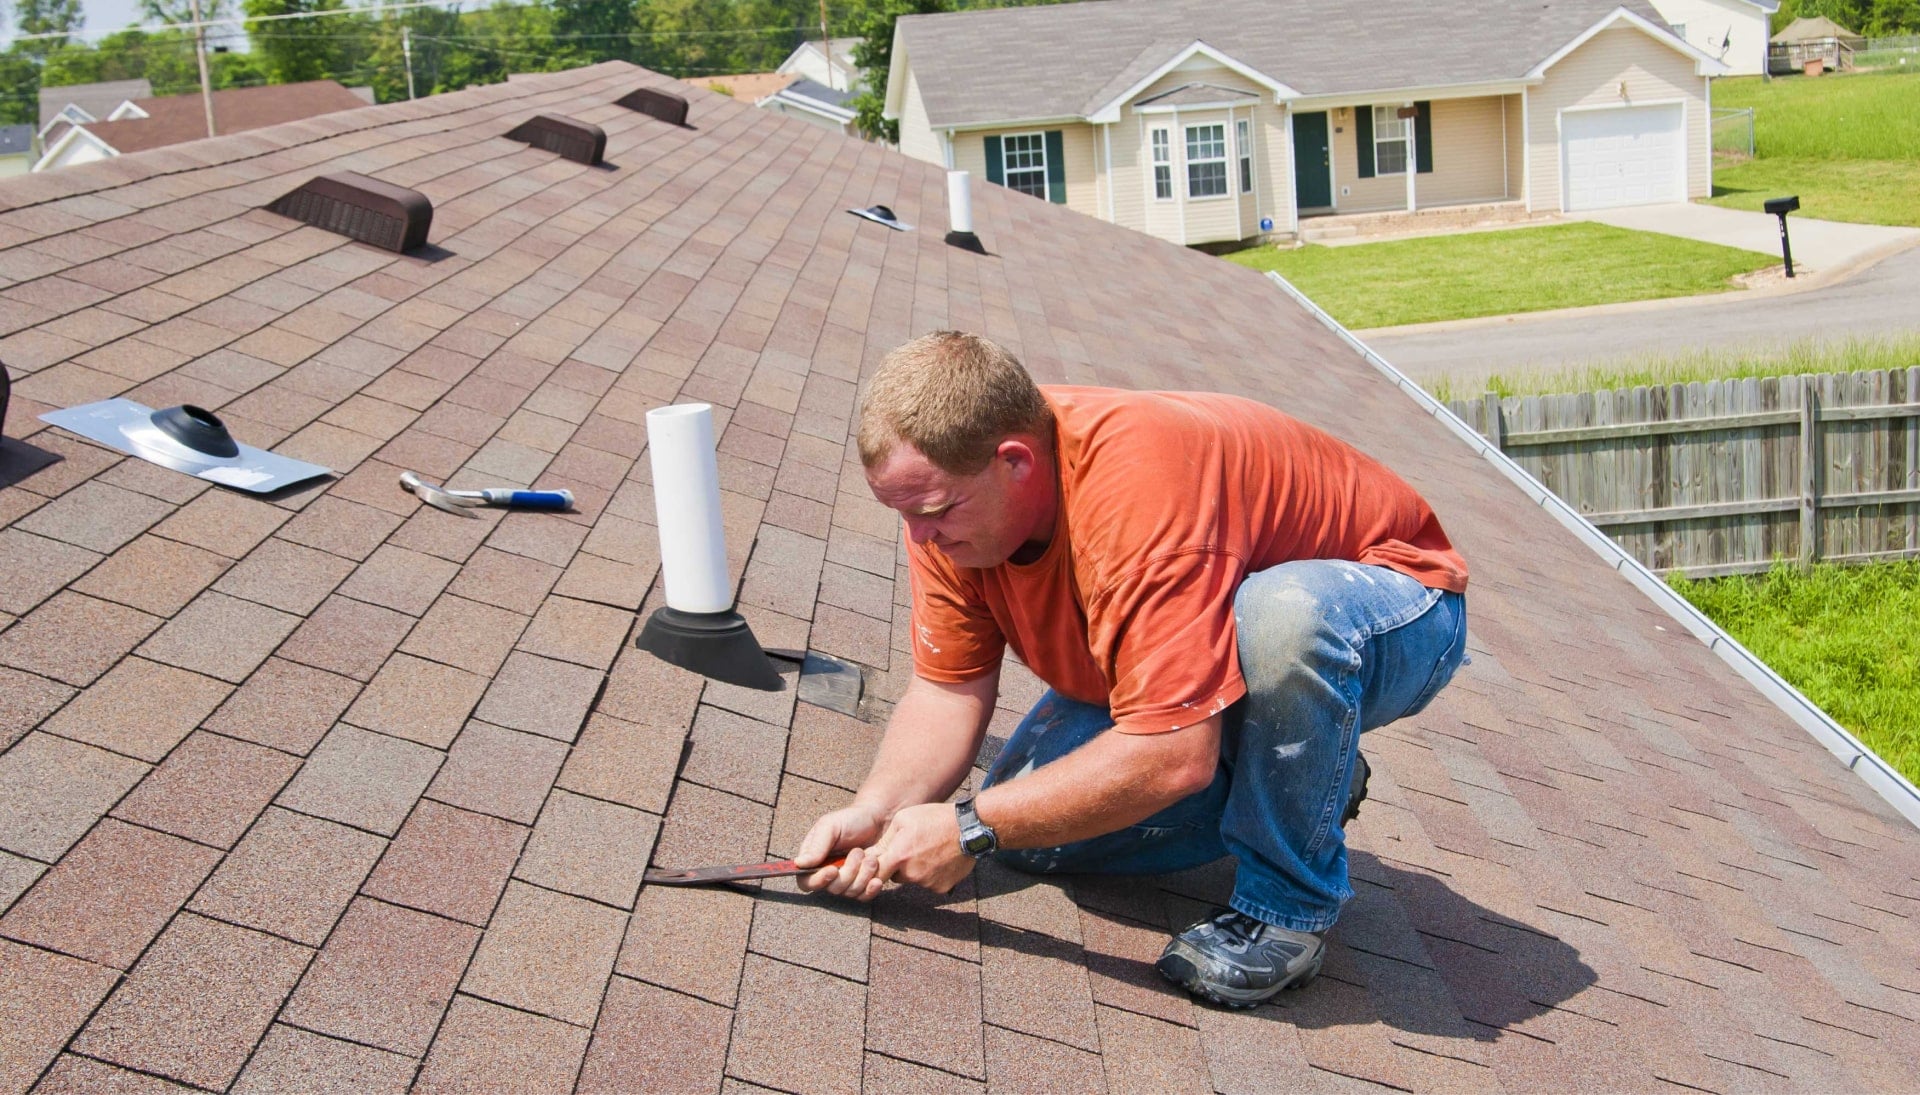 Dependable Roof and shingle repair experts in Long Island, New York committed to customer satisfaction.